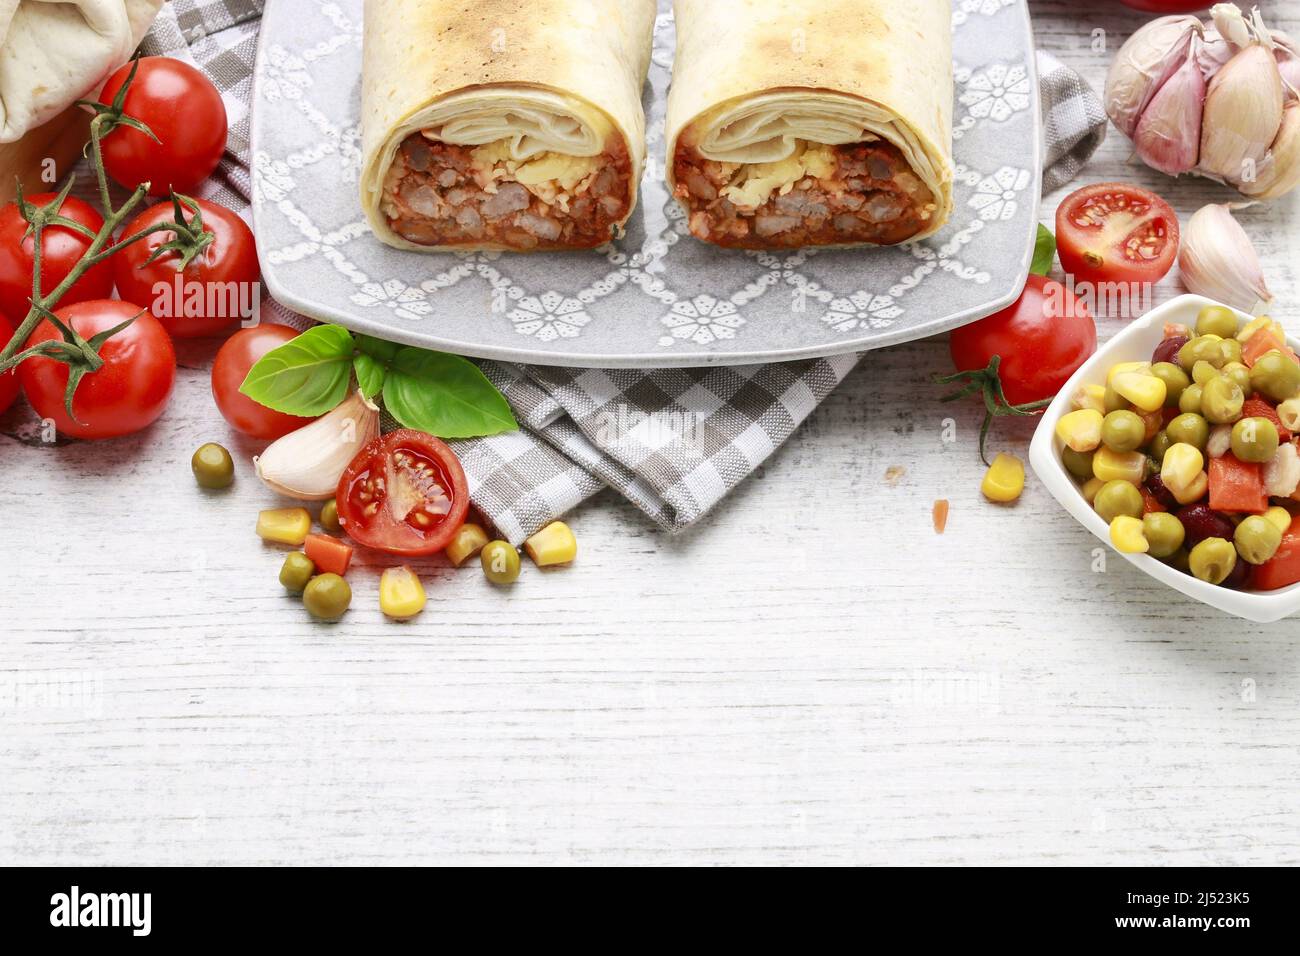 A burrito - mexican dish that consists of a flour tortilla with various ingredients. Traditional dish Stock Photo